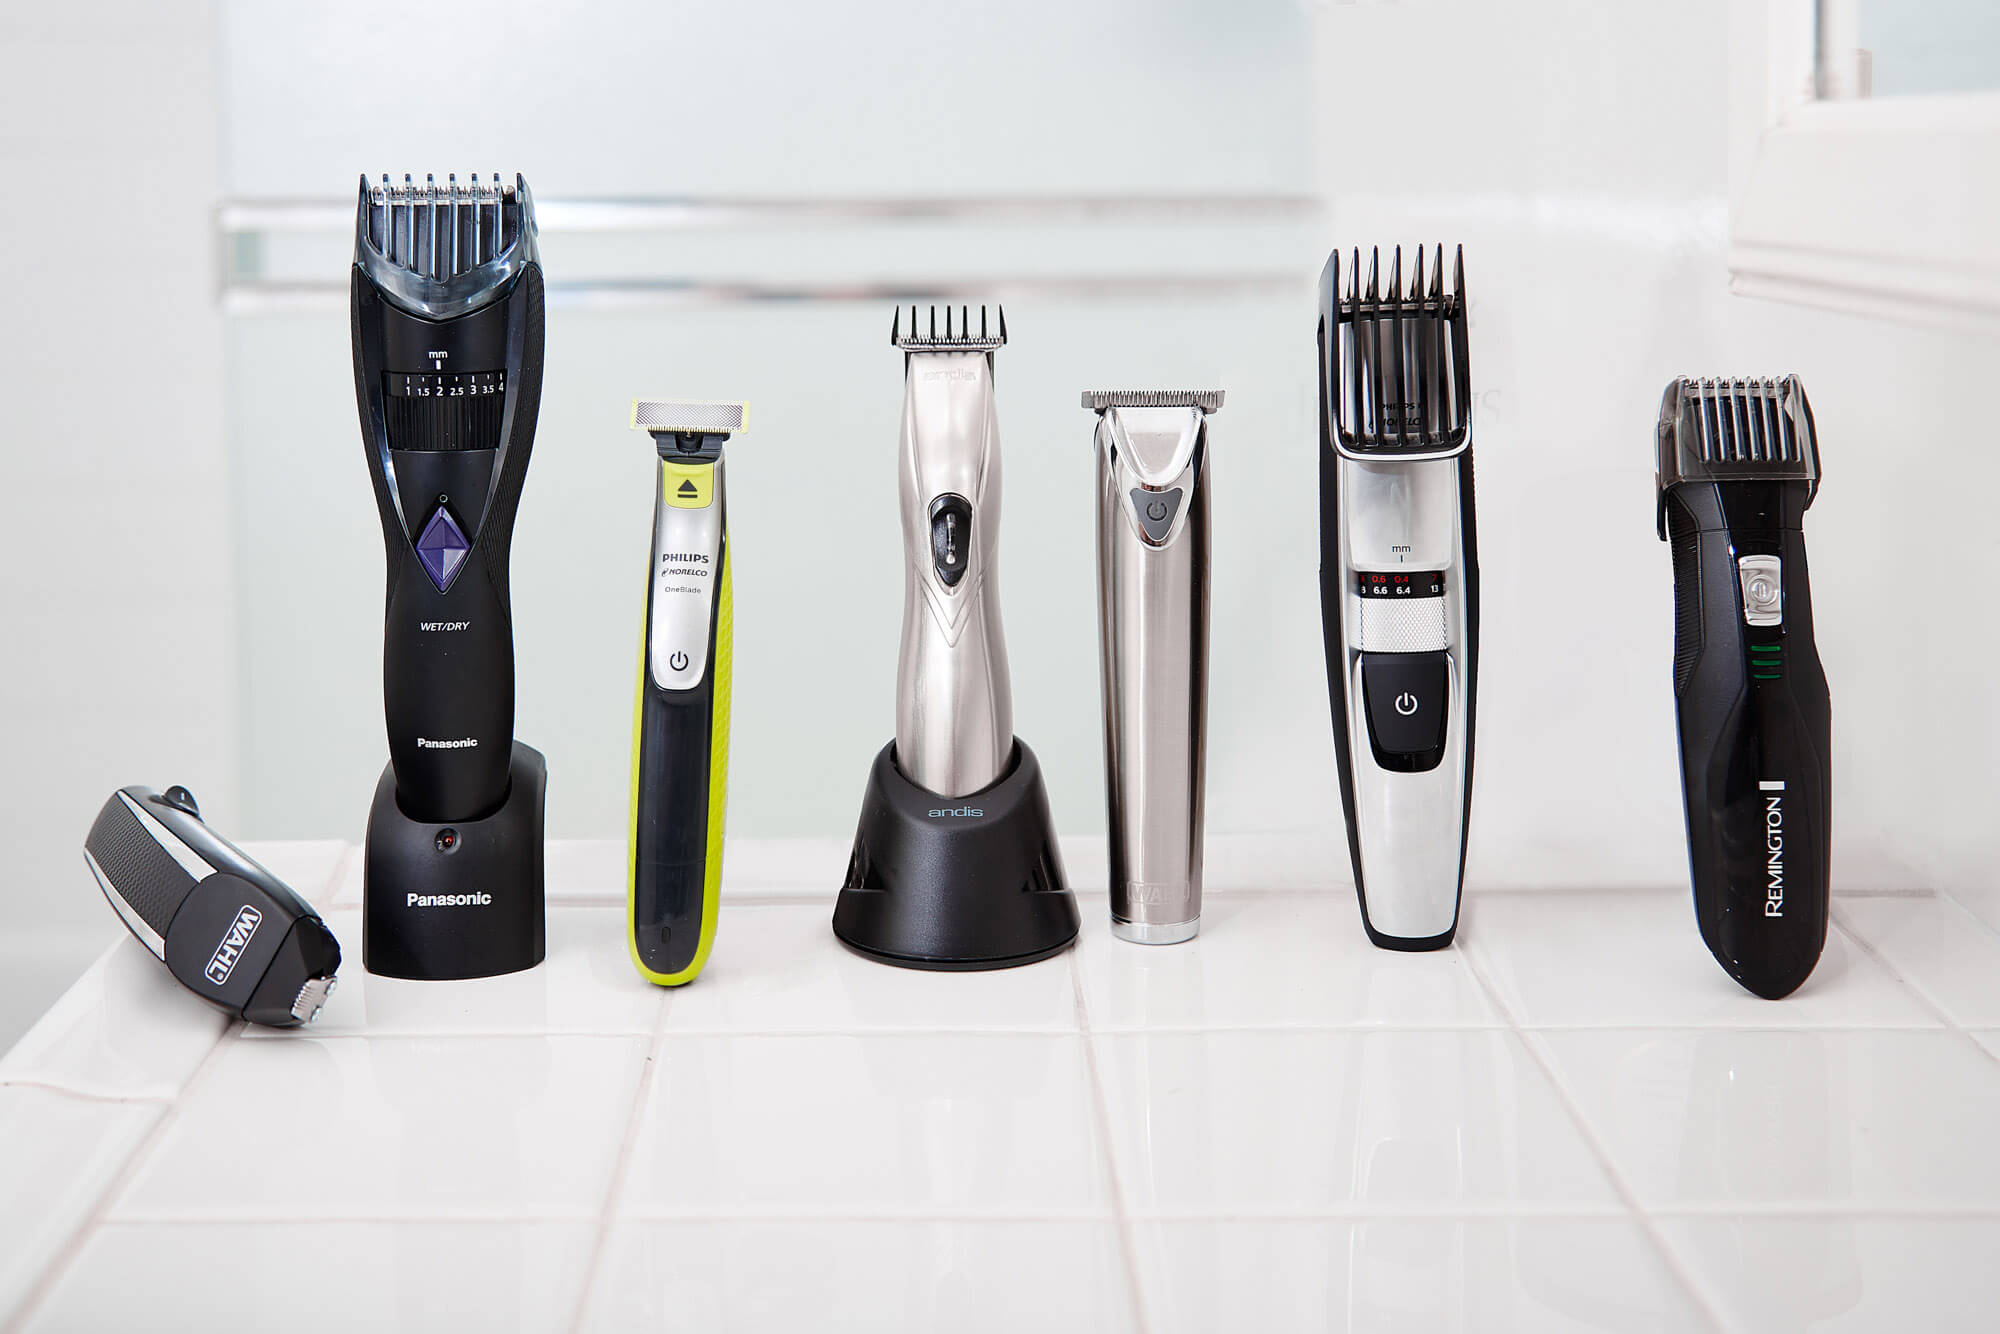 What is the best beard trimmer brand